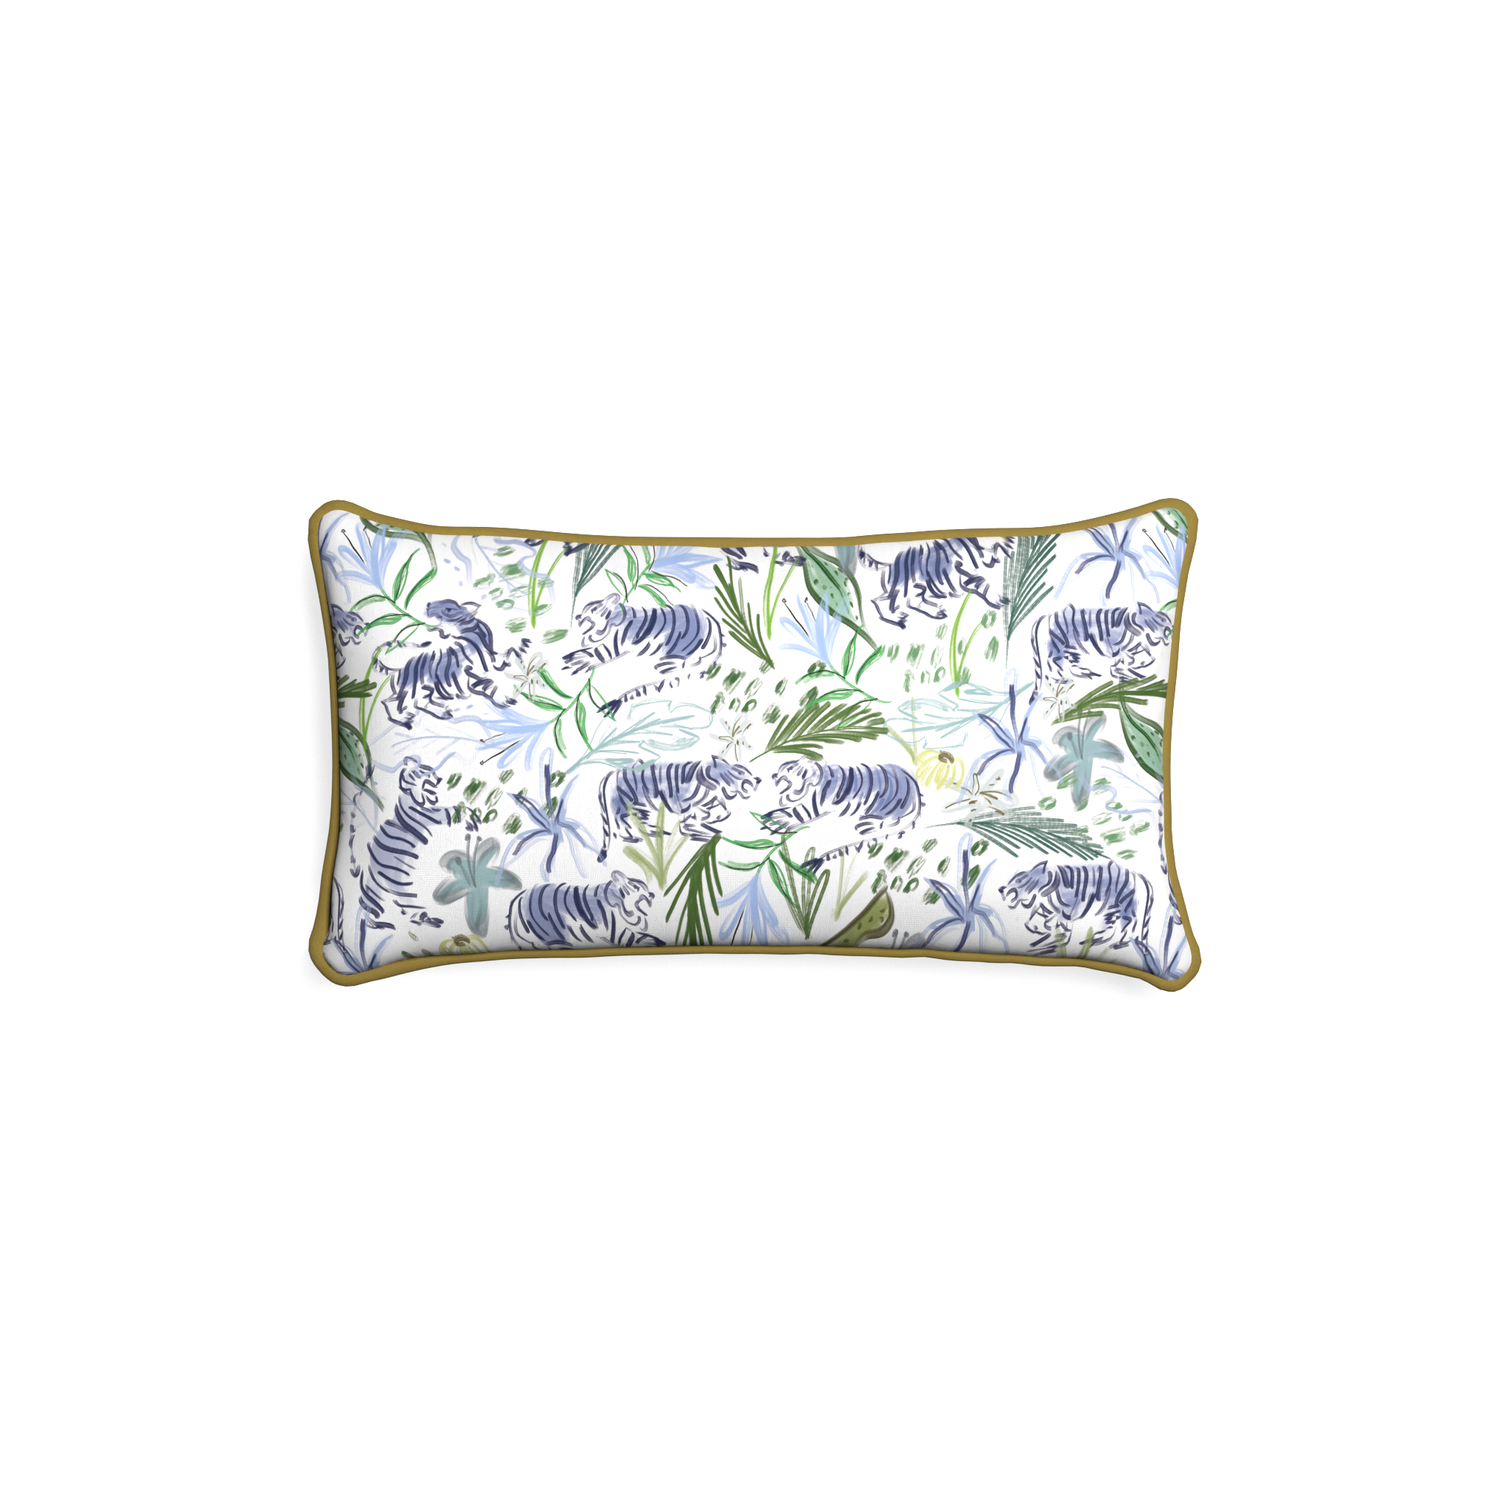 Petite-lumbar frida green custom green tigerpillow with c piping on white background